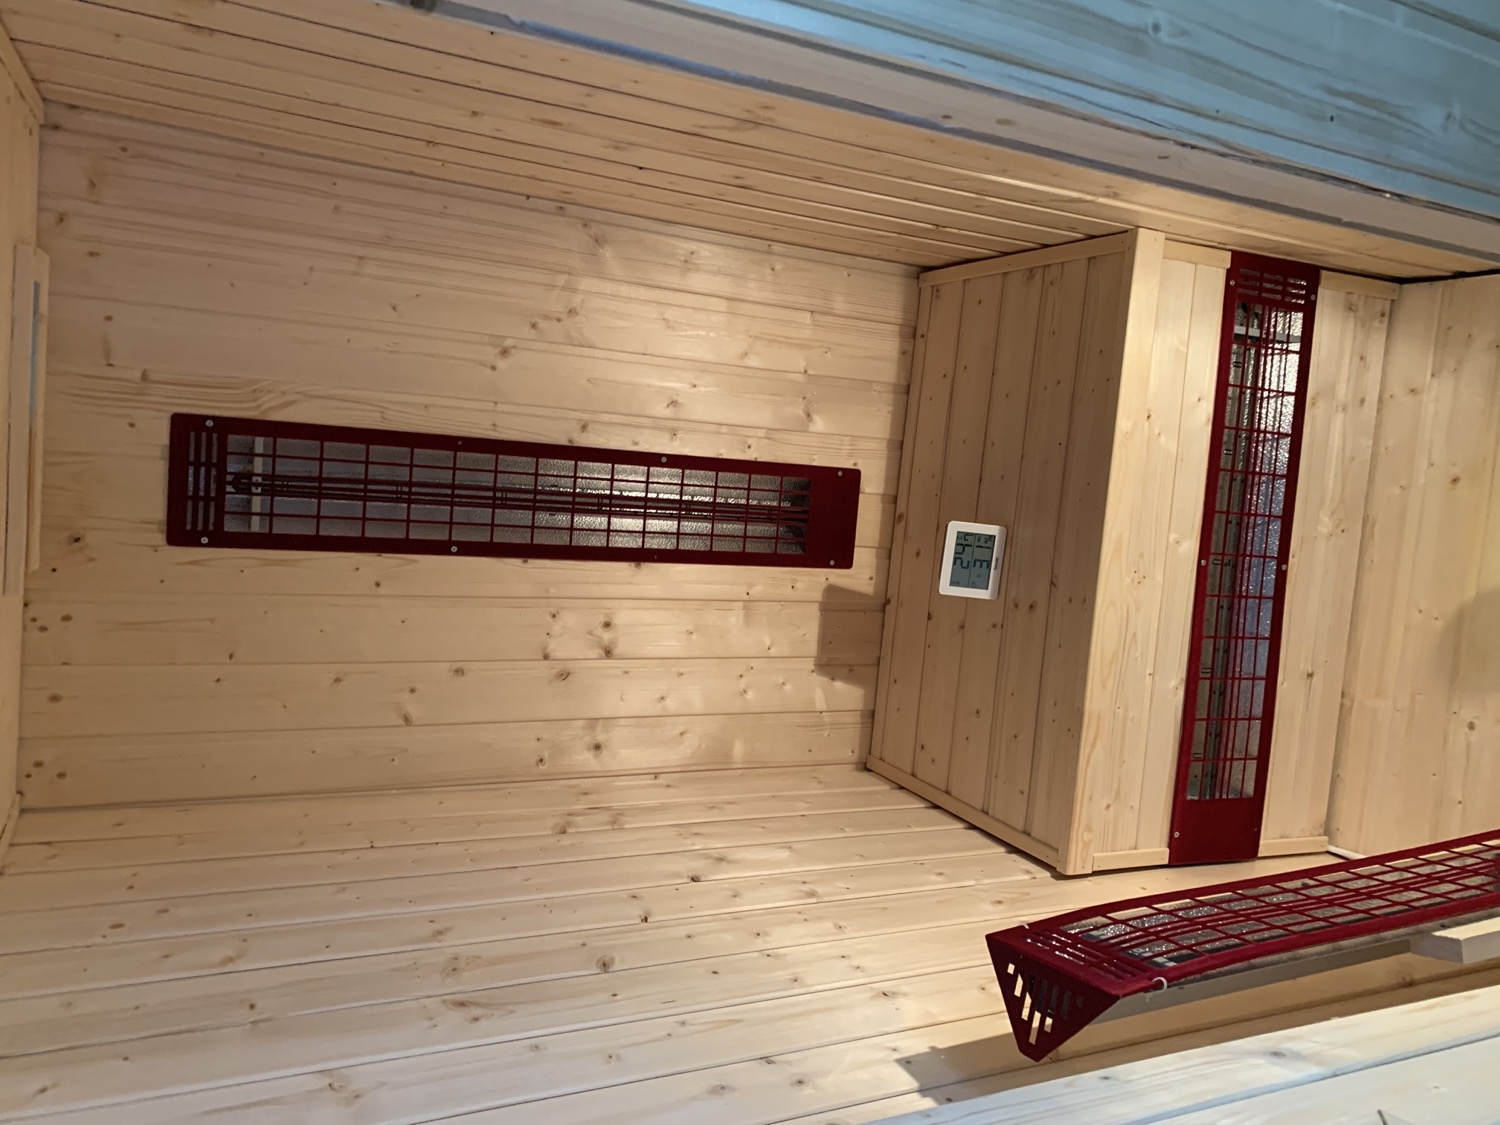 Bench installed in sauna, also added some wood trim on the sides to clean it up nicely.